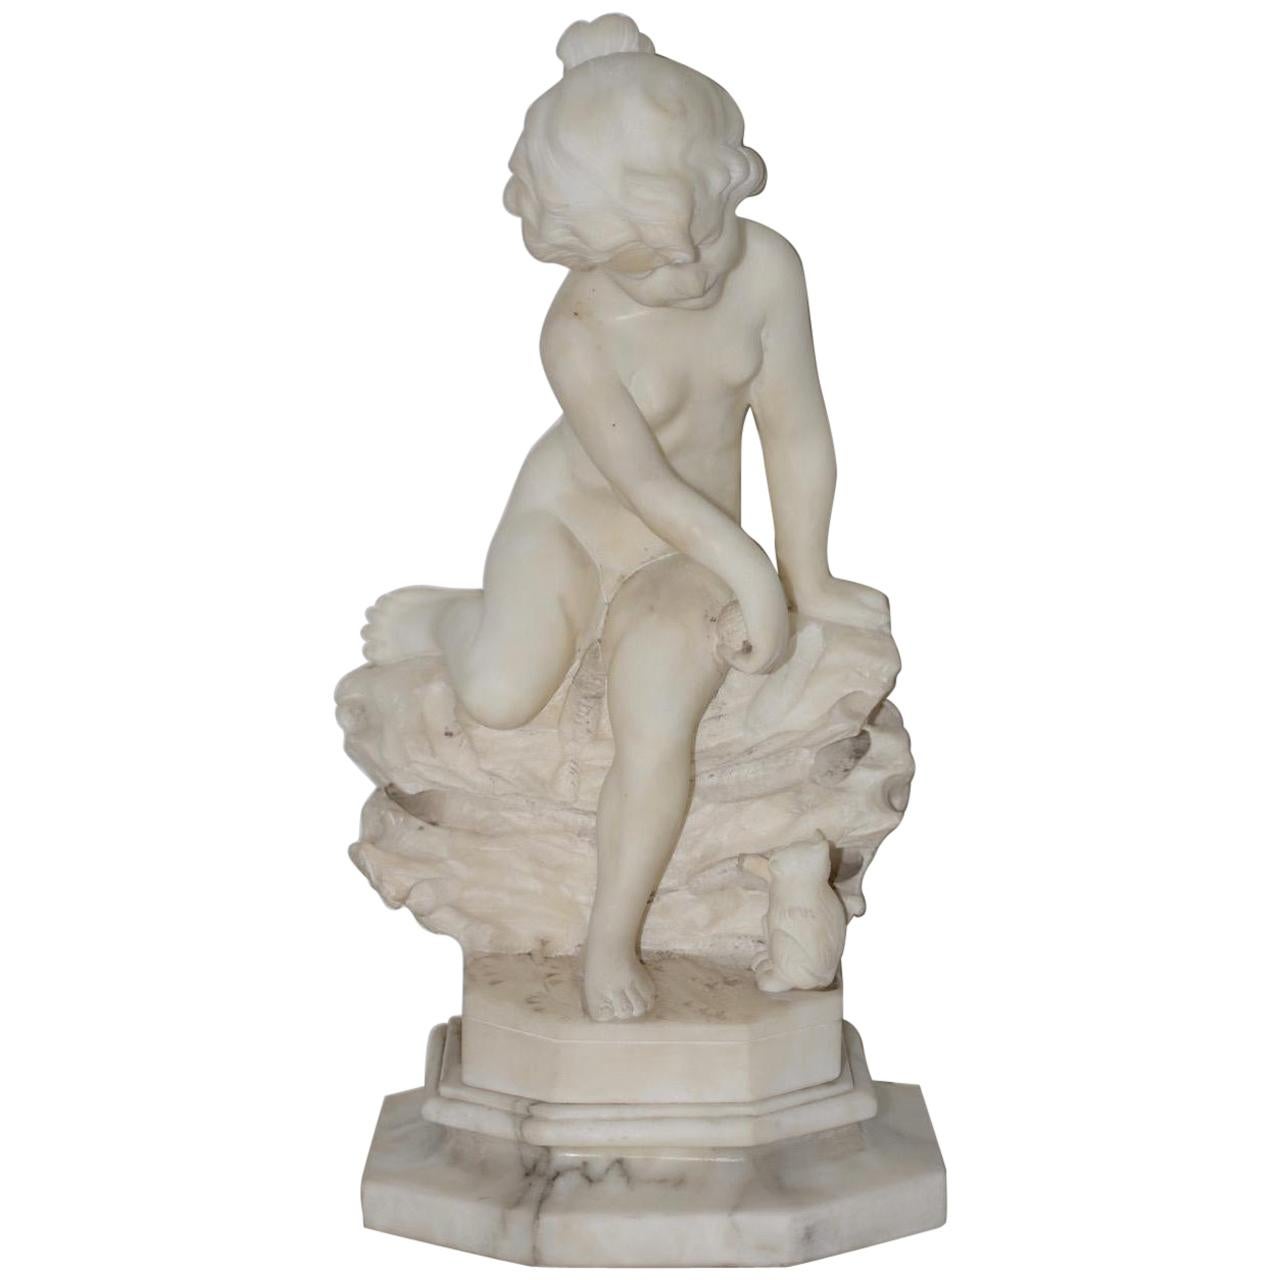 19th-Early 20th Century Marble Sculpture Young Child with Kitten, circa 1920 For Sale